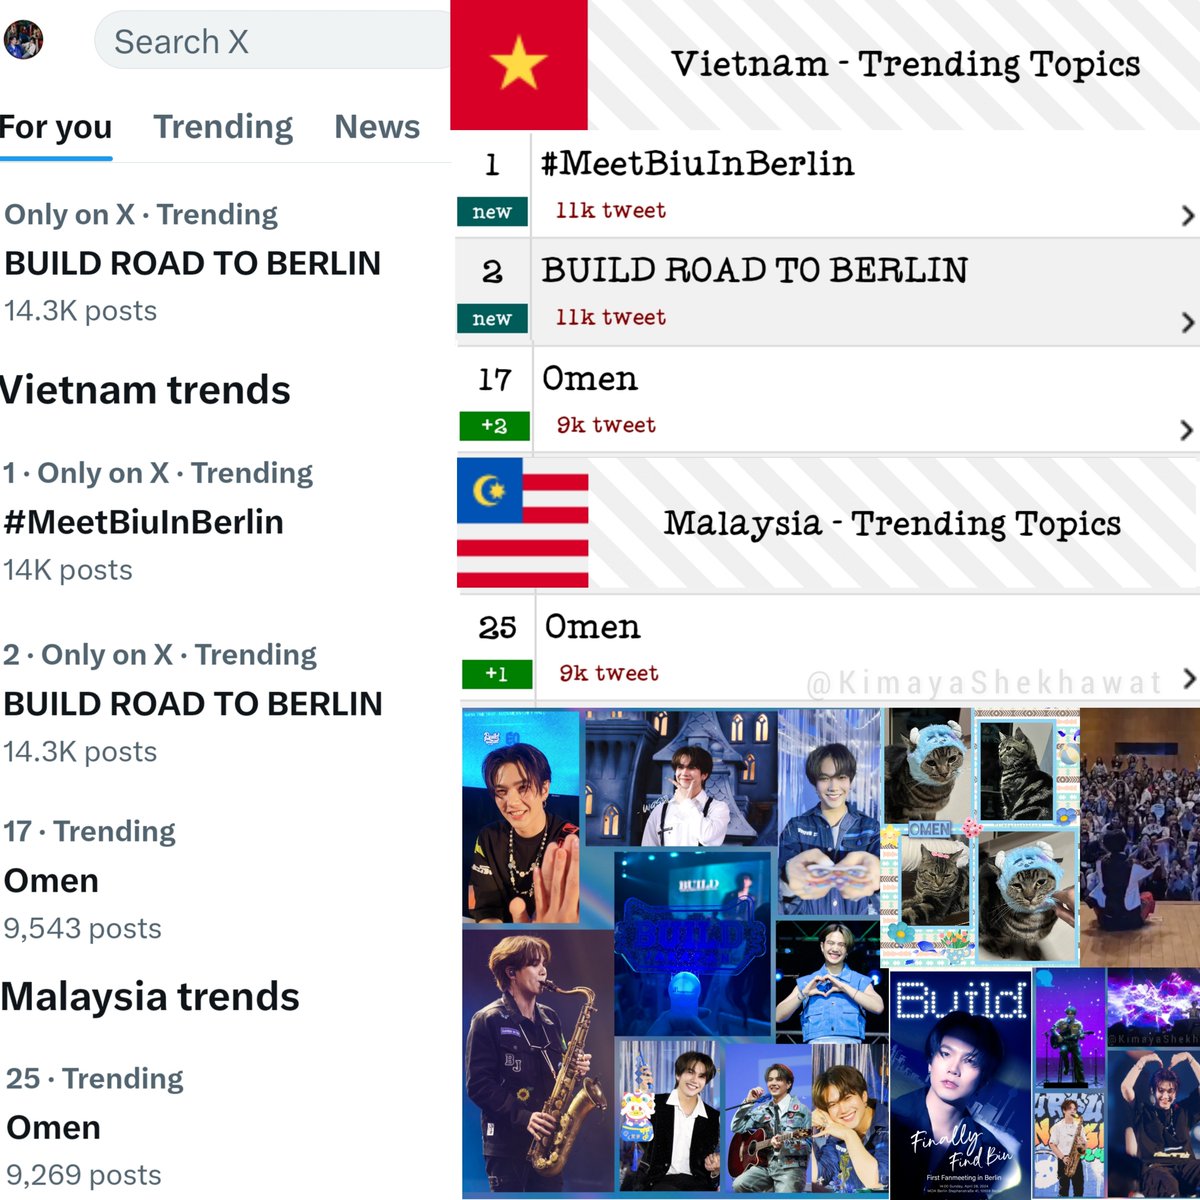 He is Trending 💙✨ We reached No.1,2 & 17 in Vietnam, No.25 in Malaysia! 🔥 Our Omen is also trending like his papa Build 😻✨ Great going Beyourluve 💙 @JakeB4rever BUILD ROAD TO BERLIN #MeetBiuInBerlin